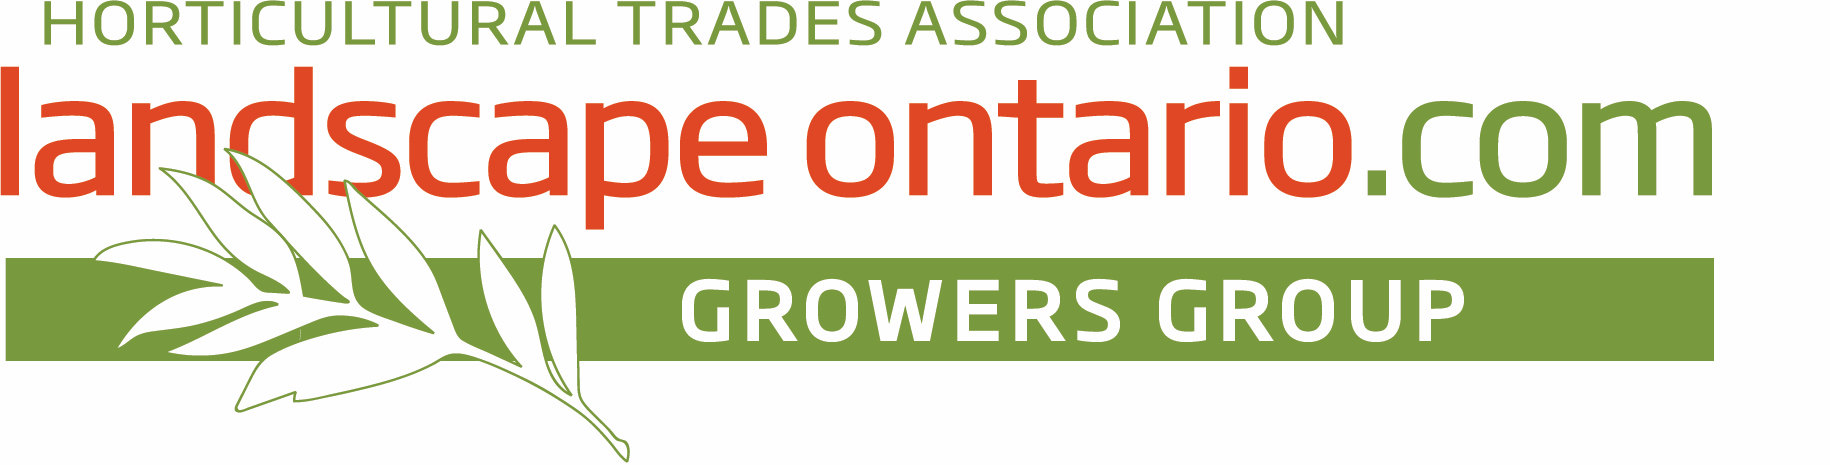 Landscape Ontario Growers Group